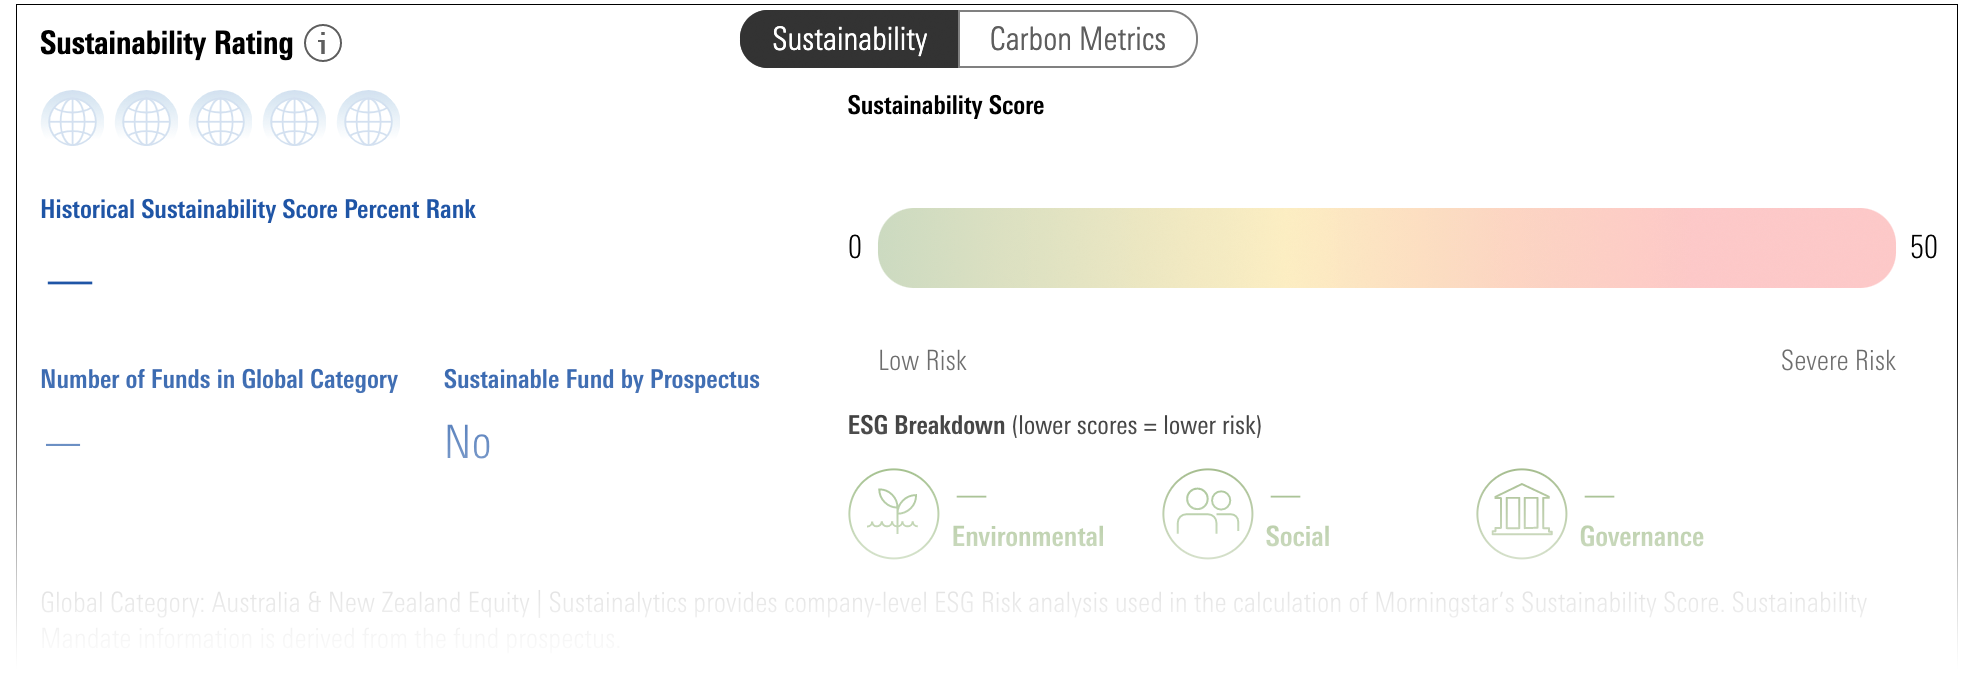 Morningstar Research Advisory - Sustainable Investing